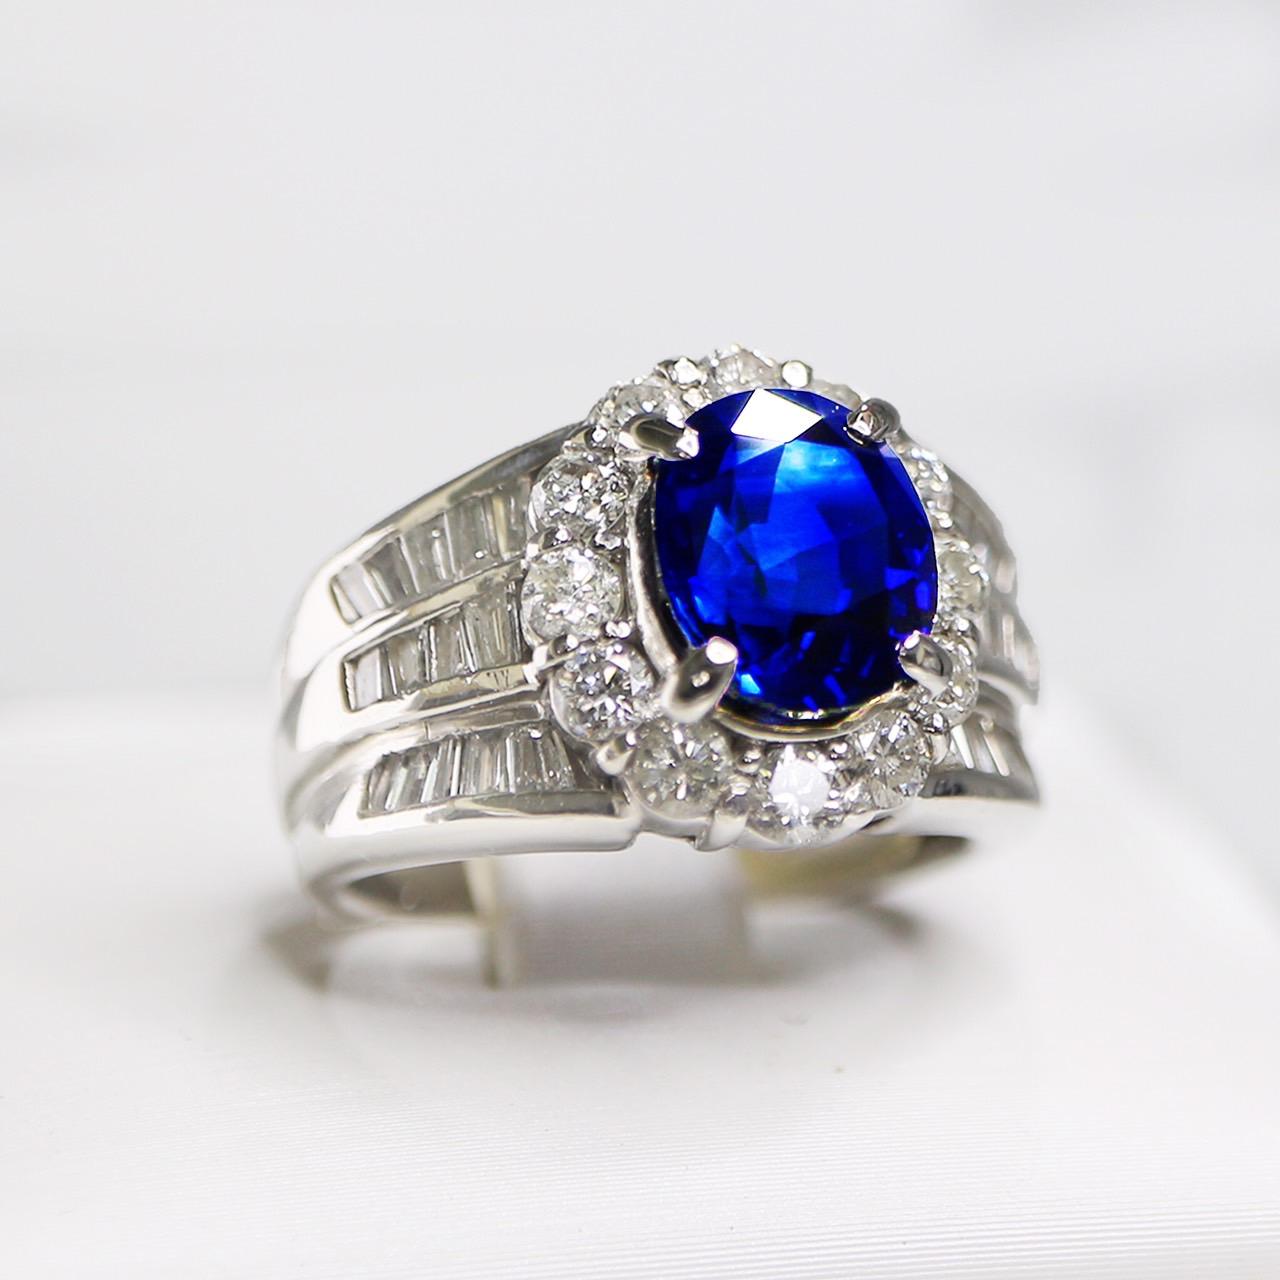 Certified PT900 3.30 ct Royal Blue Sapphire Art Deco Engagement Ring For Sale 3